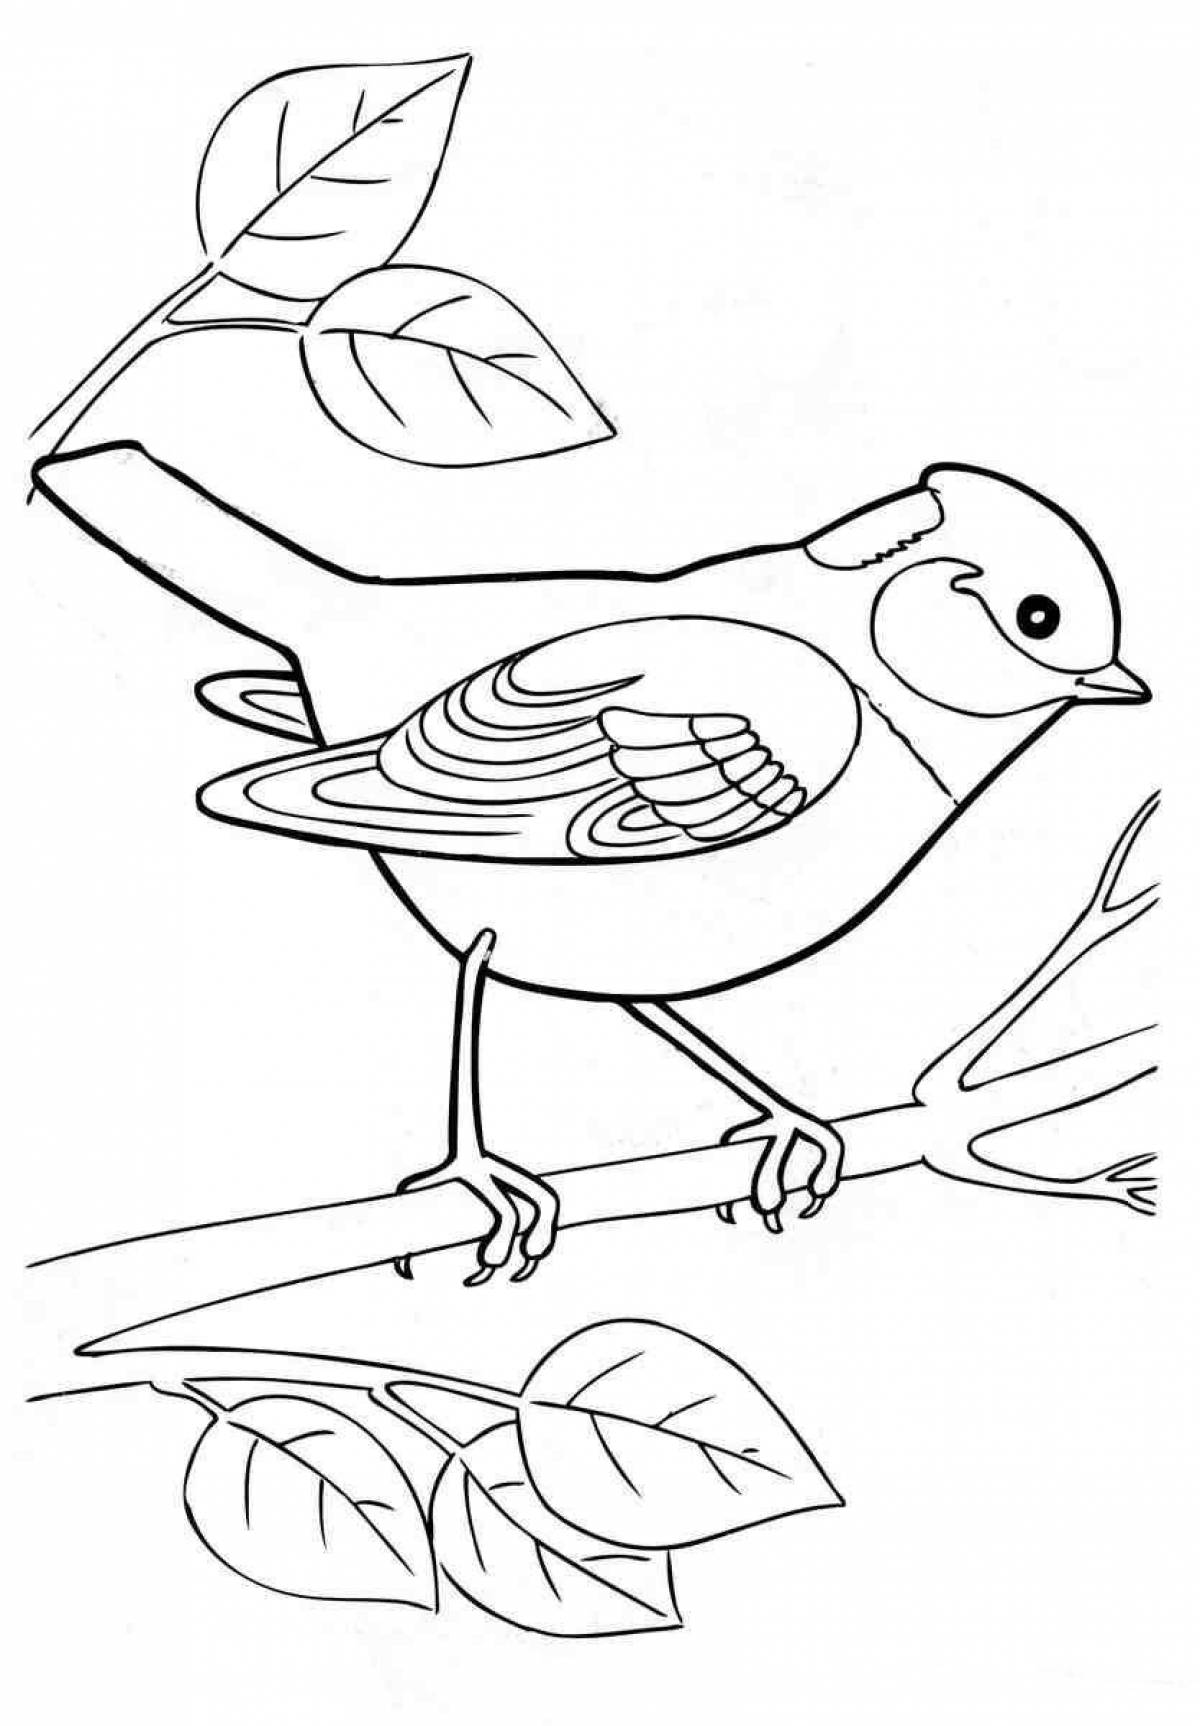 Coloring pages of wintering birds for 4-5 year olds